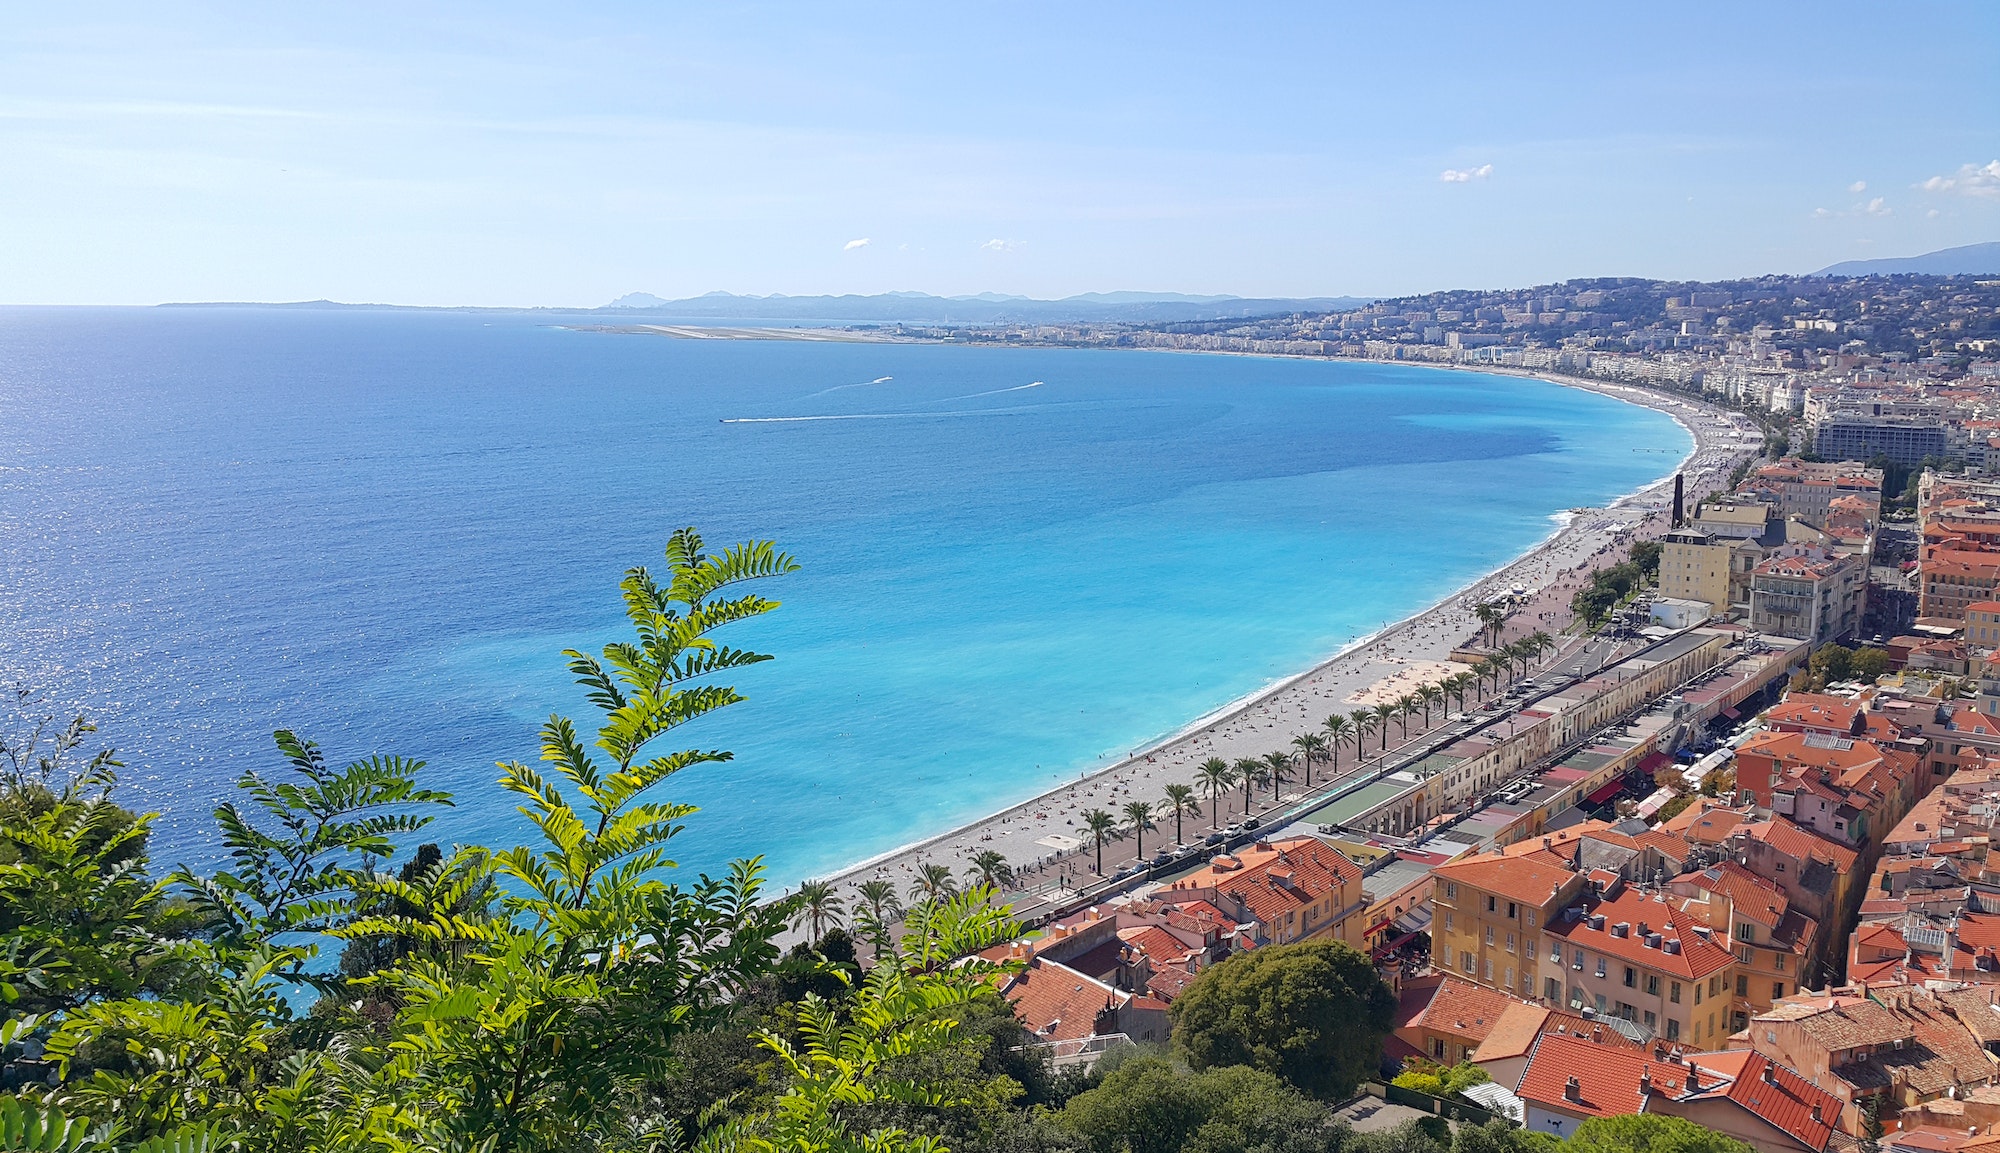 Are you planning a visit to Nice and its surroundings? Here is how to prepare yourself efficiently!